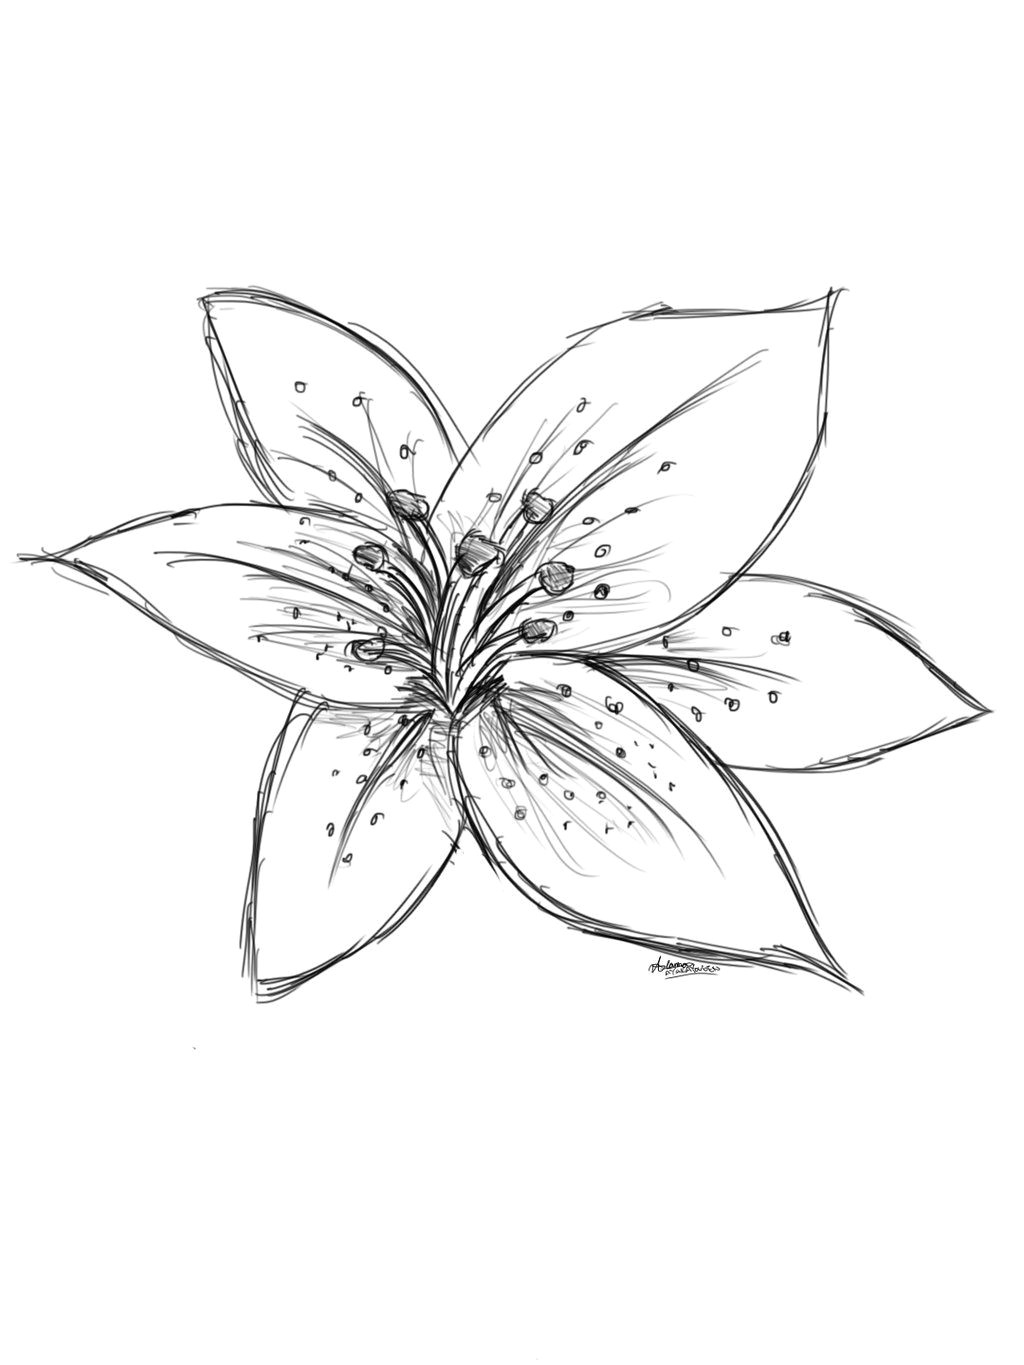 Drawing Flowers Techniques Image Result for Sketch Lily Flower Craft Watercolor Techniques